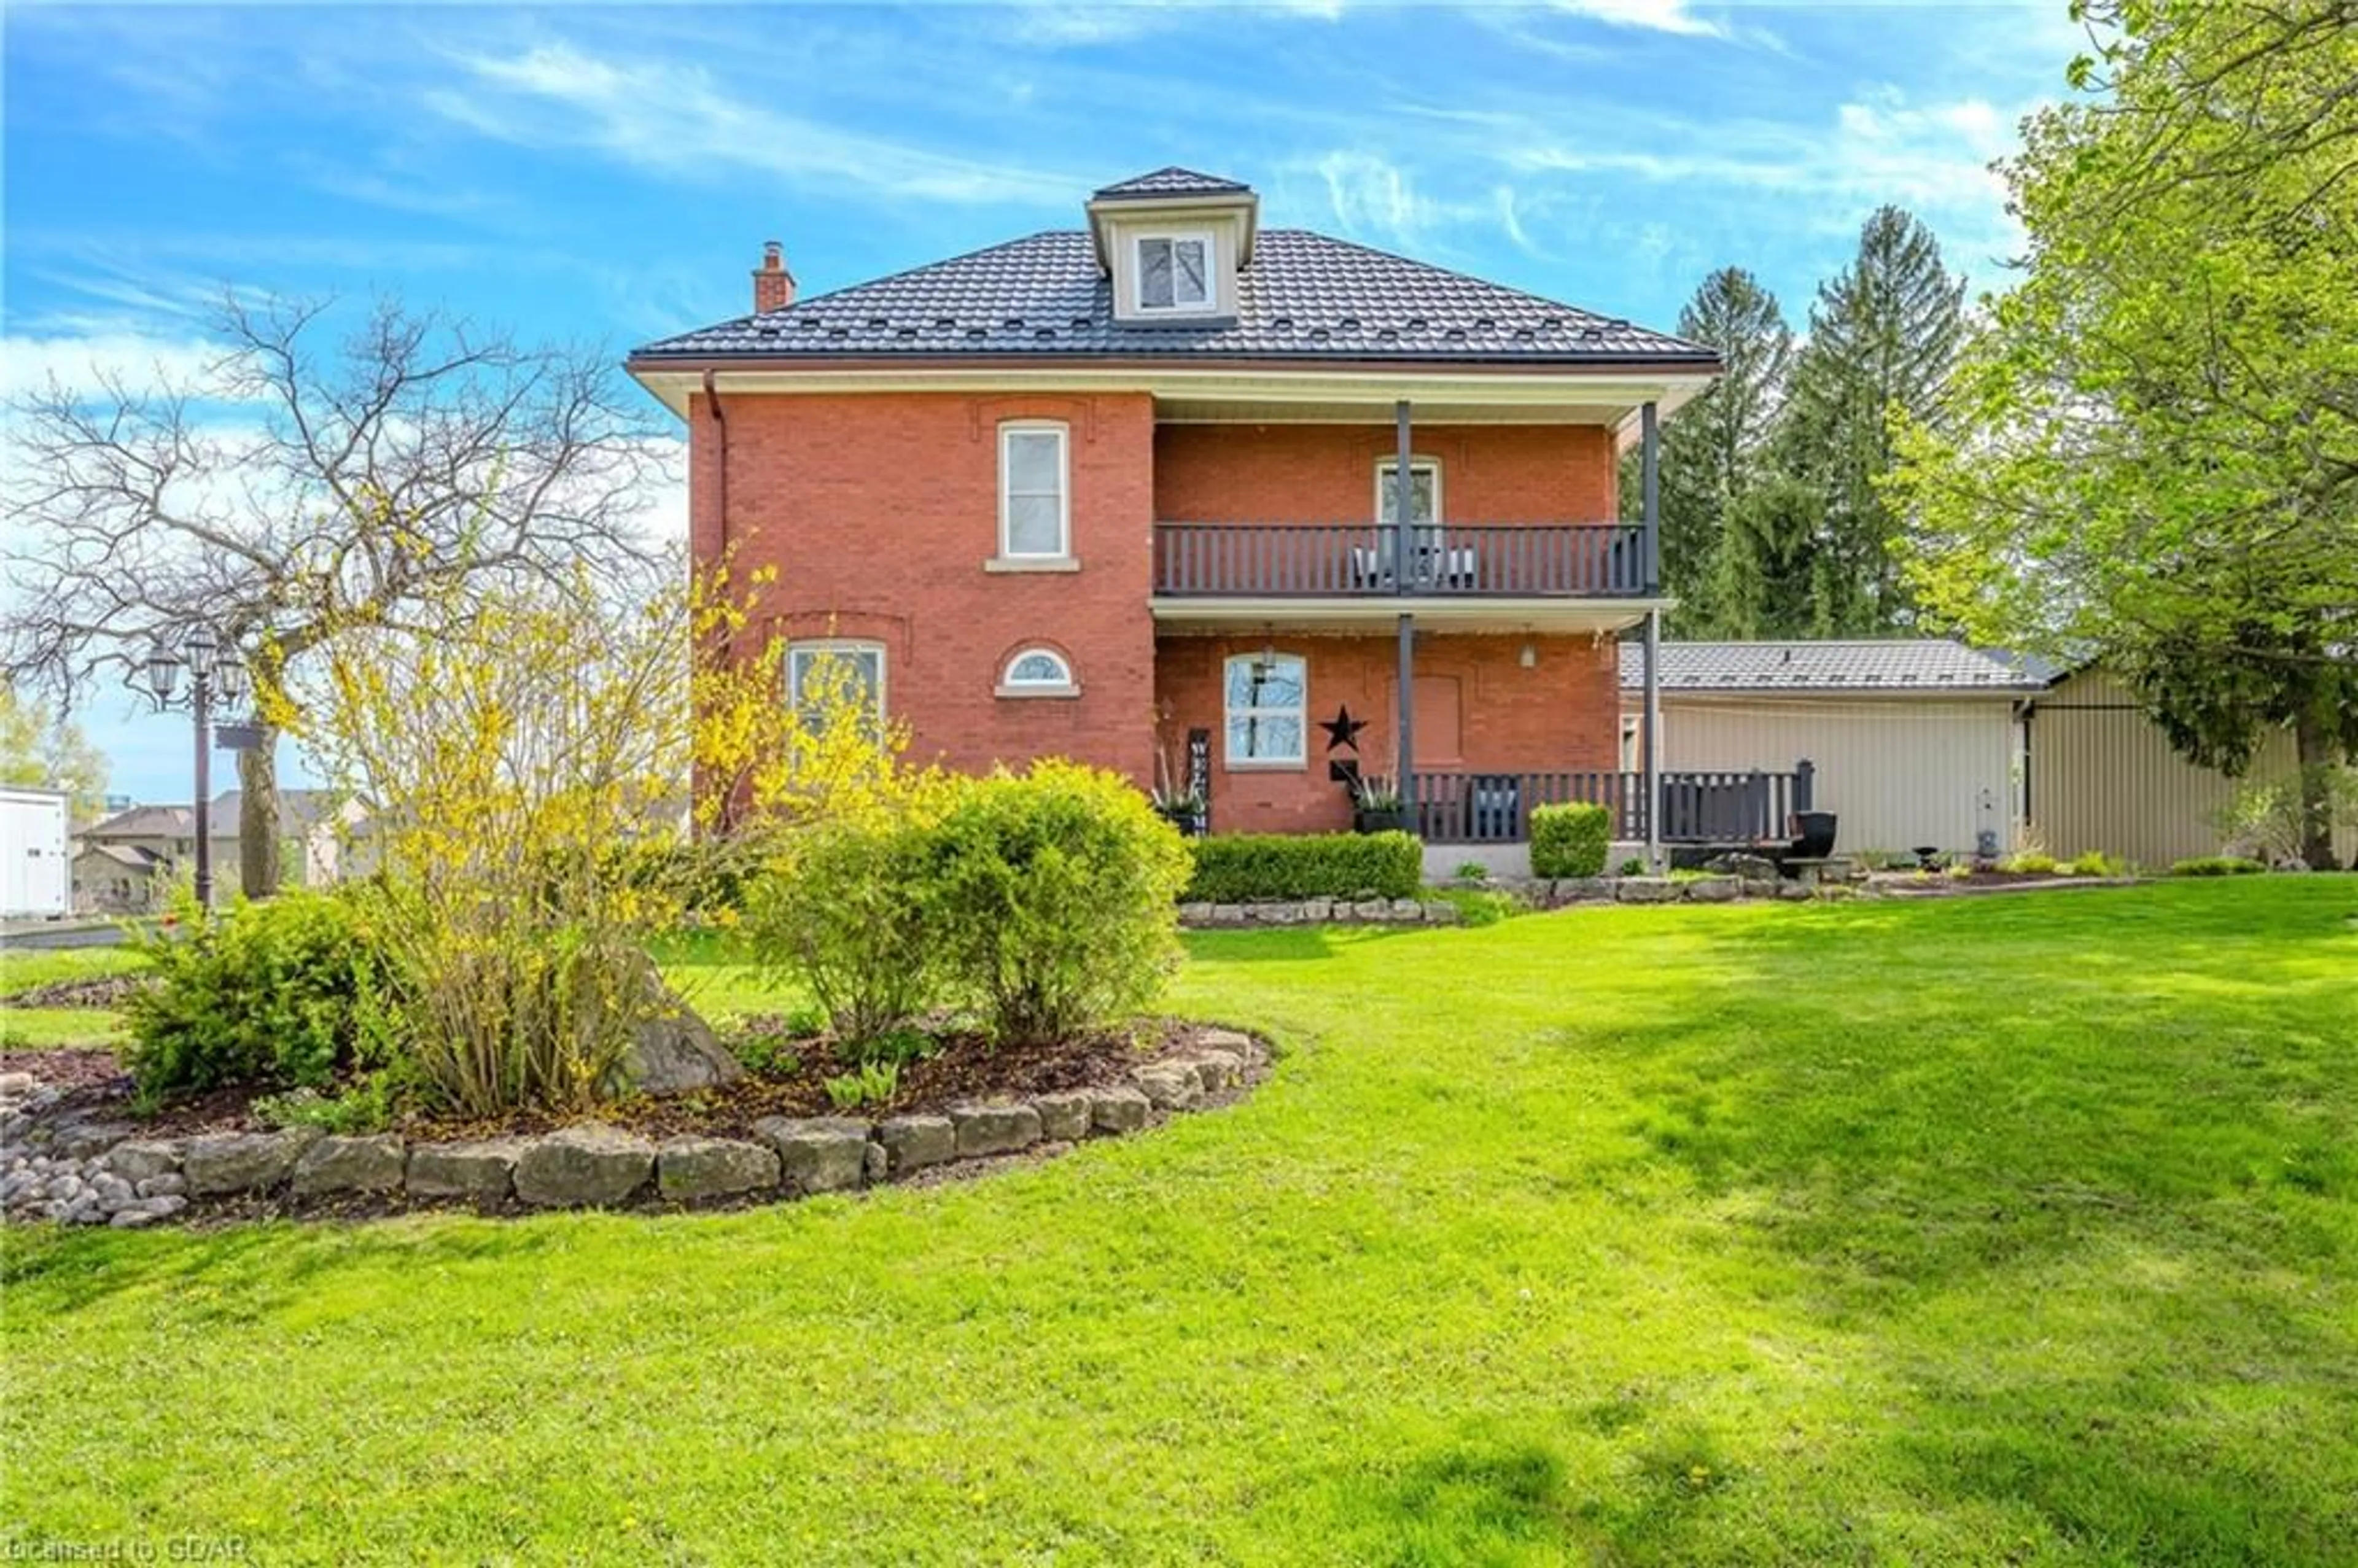 Outside view for 7750 Eastview Rd, Guelph/Eramosa Ontario N1H 6J1